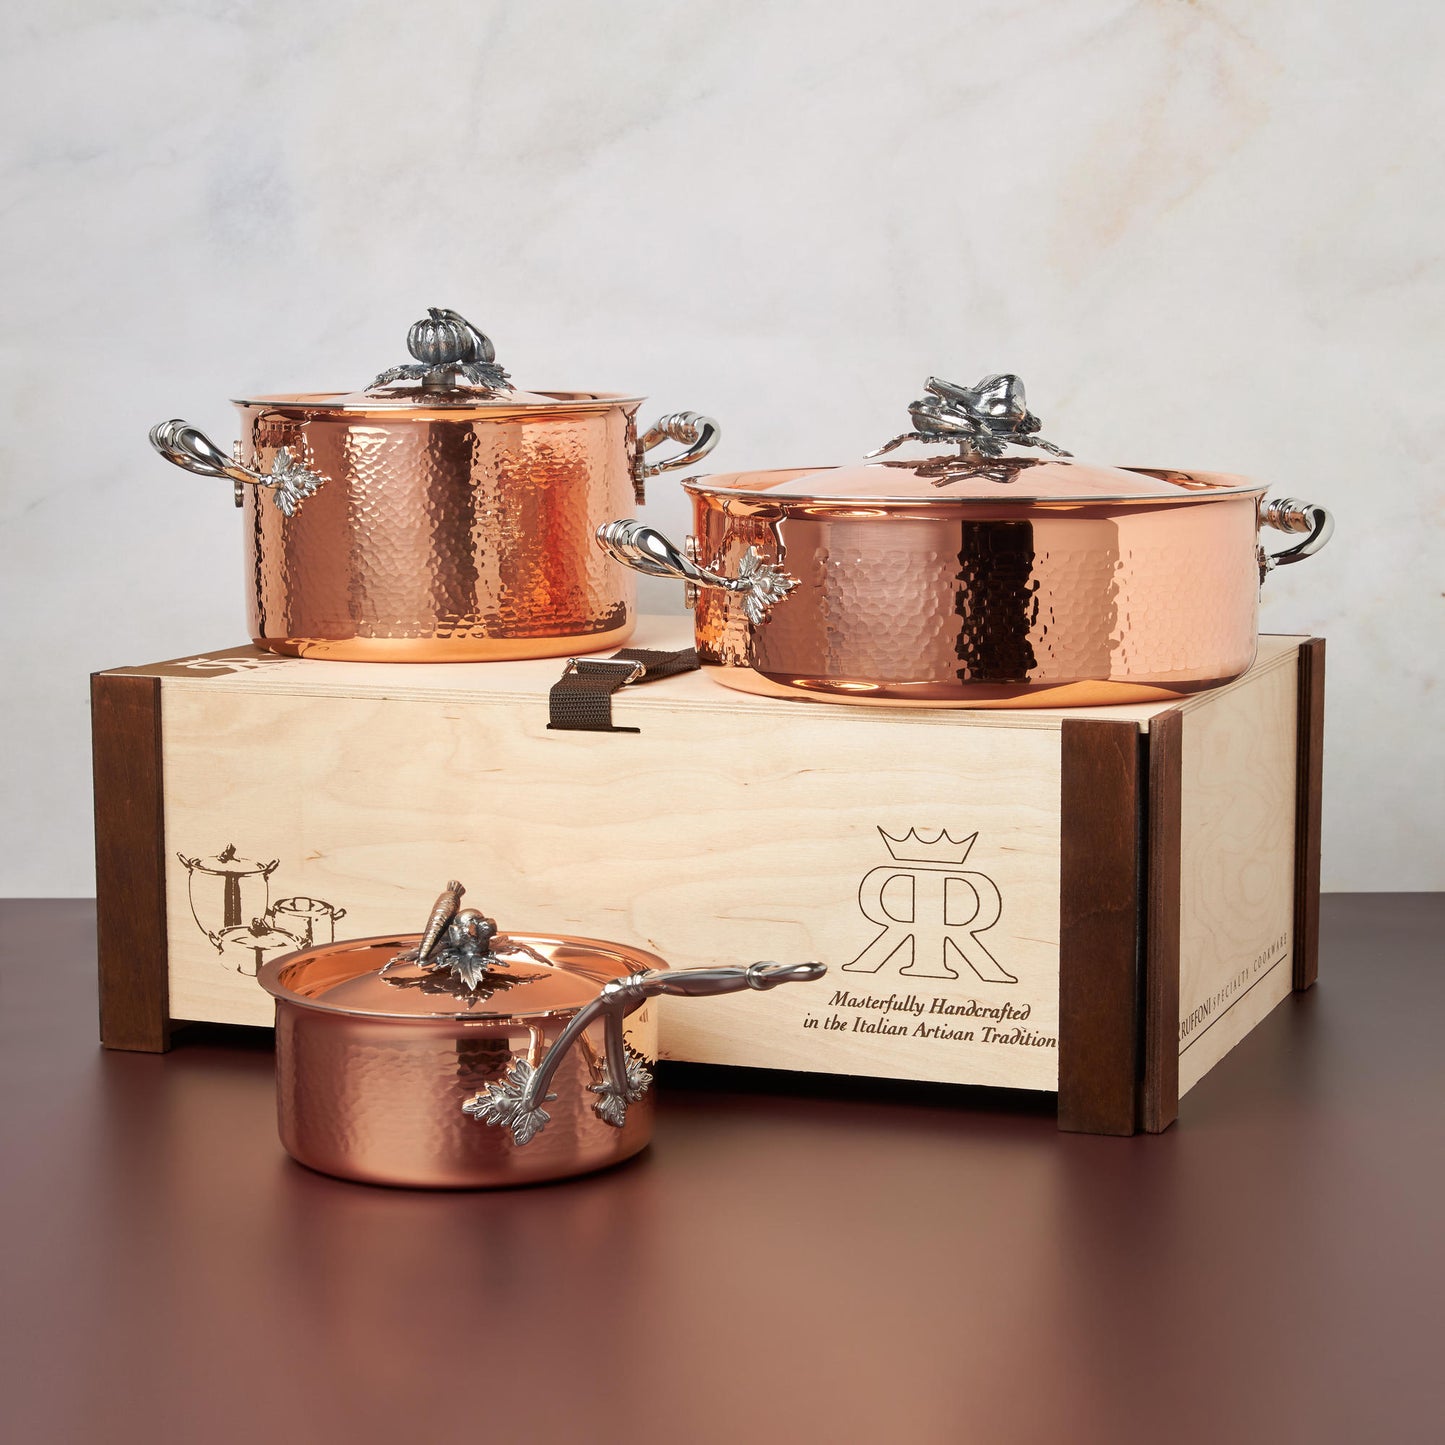 6 piece set Opus Cupra hammered copper with stainless steel lining and decorated silver-plated lid knob finial from Ruffoni